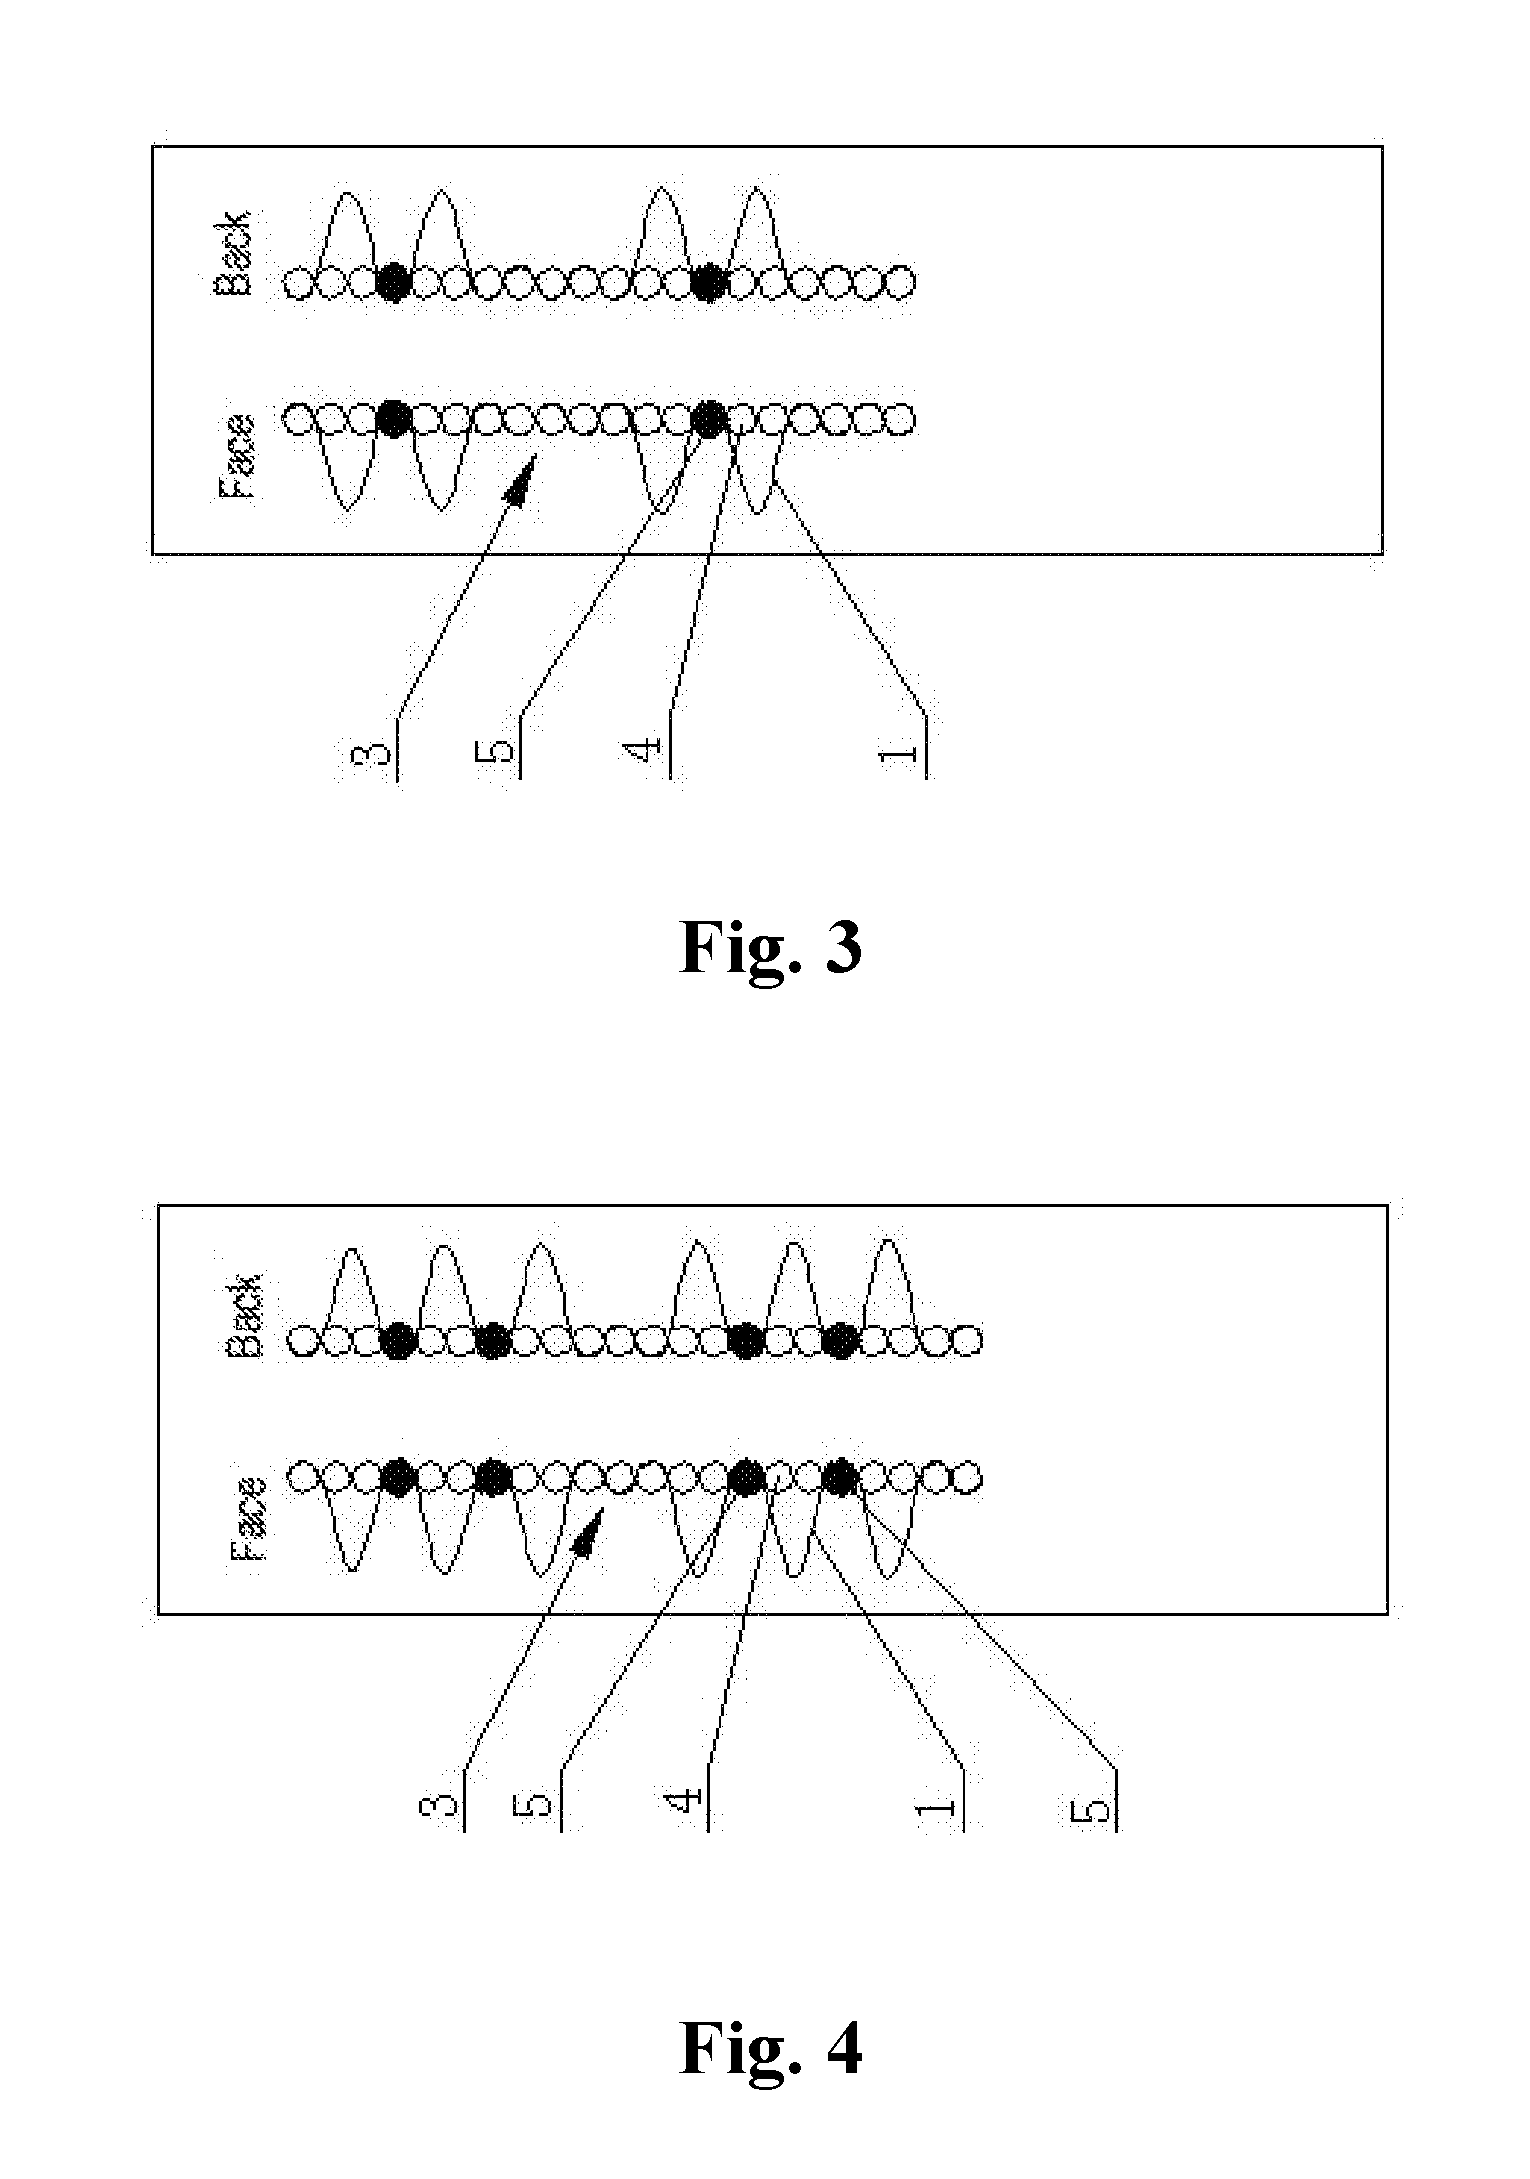 Method for Producing Towel with Ultra-long Looped Piles